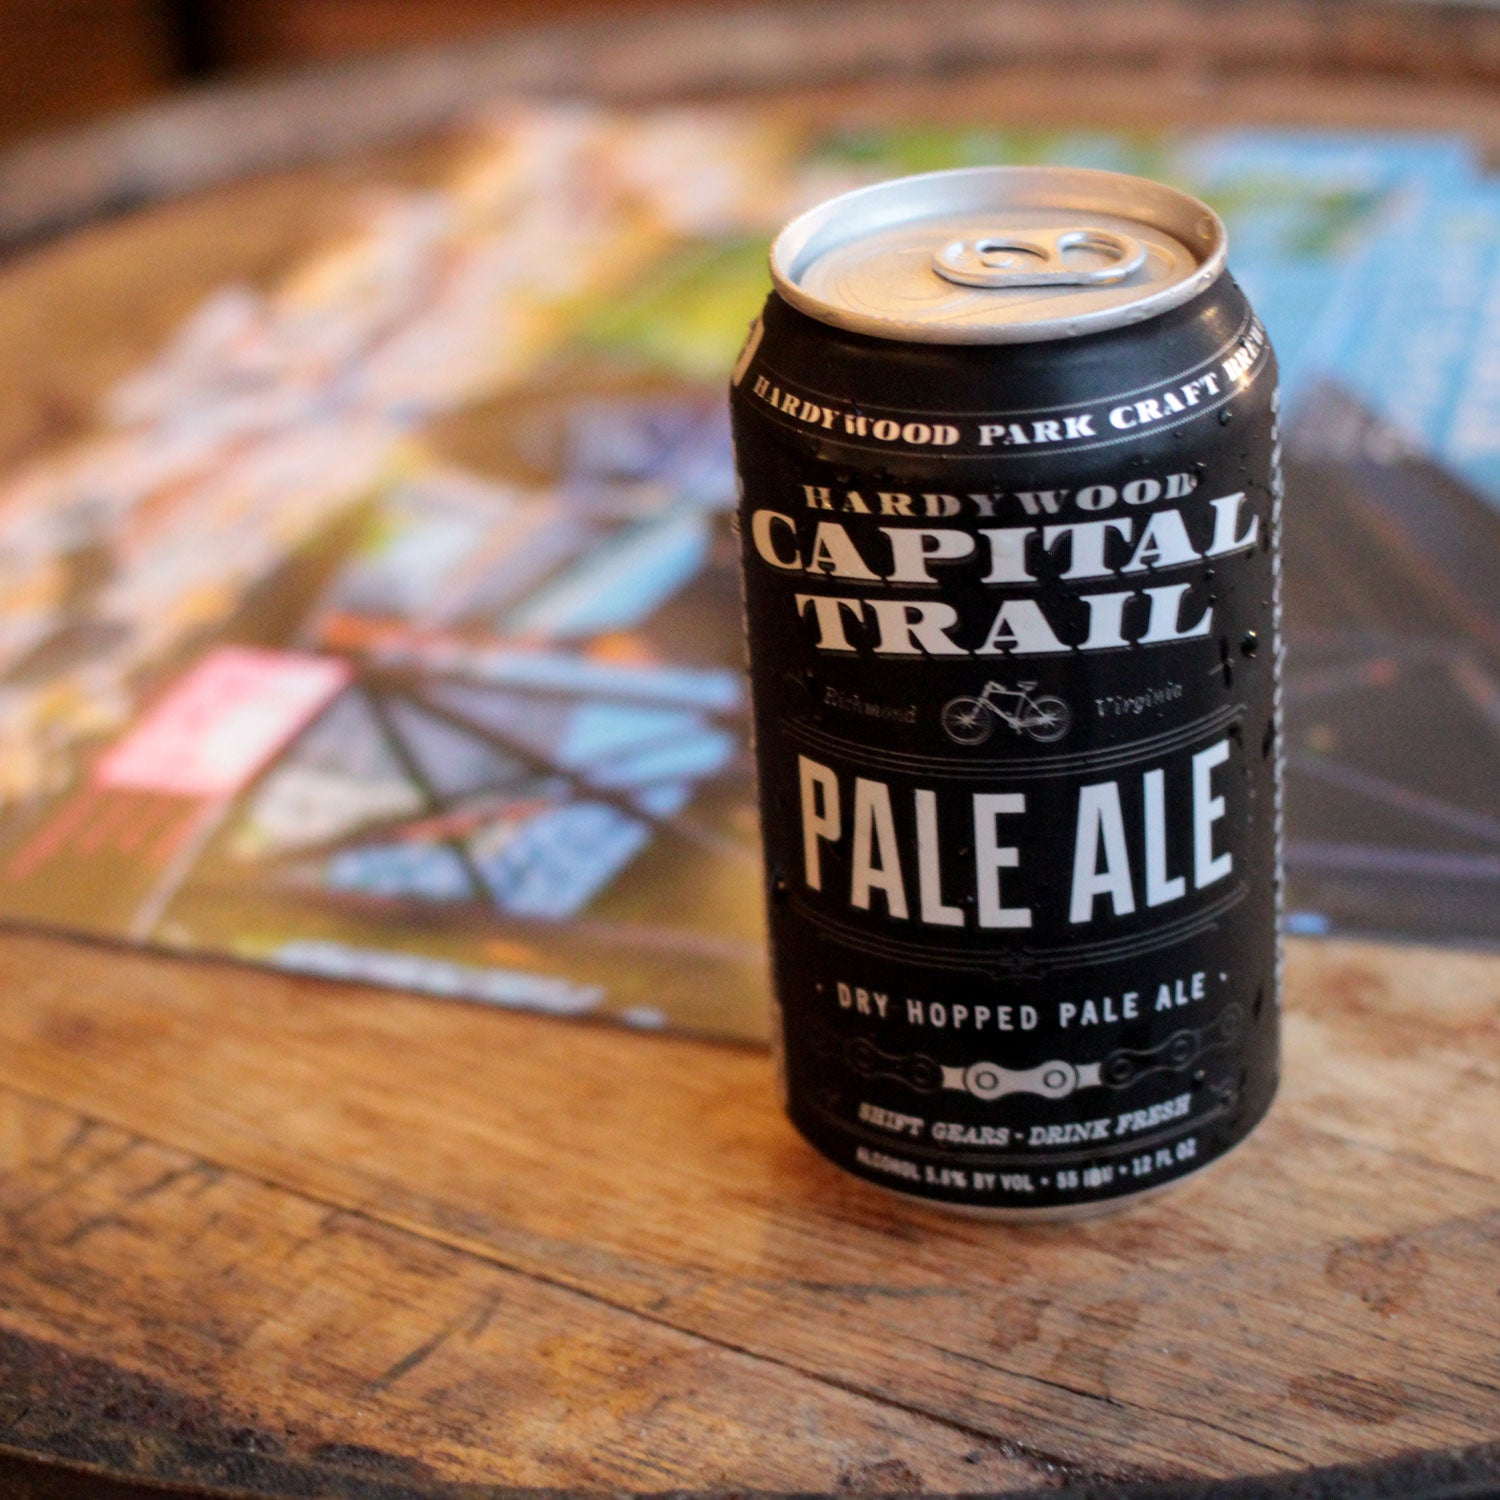 hardywood park craft brewing capital trail pale ale outside beer spring mountain biking